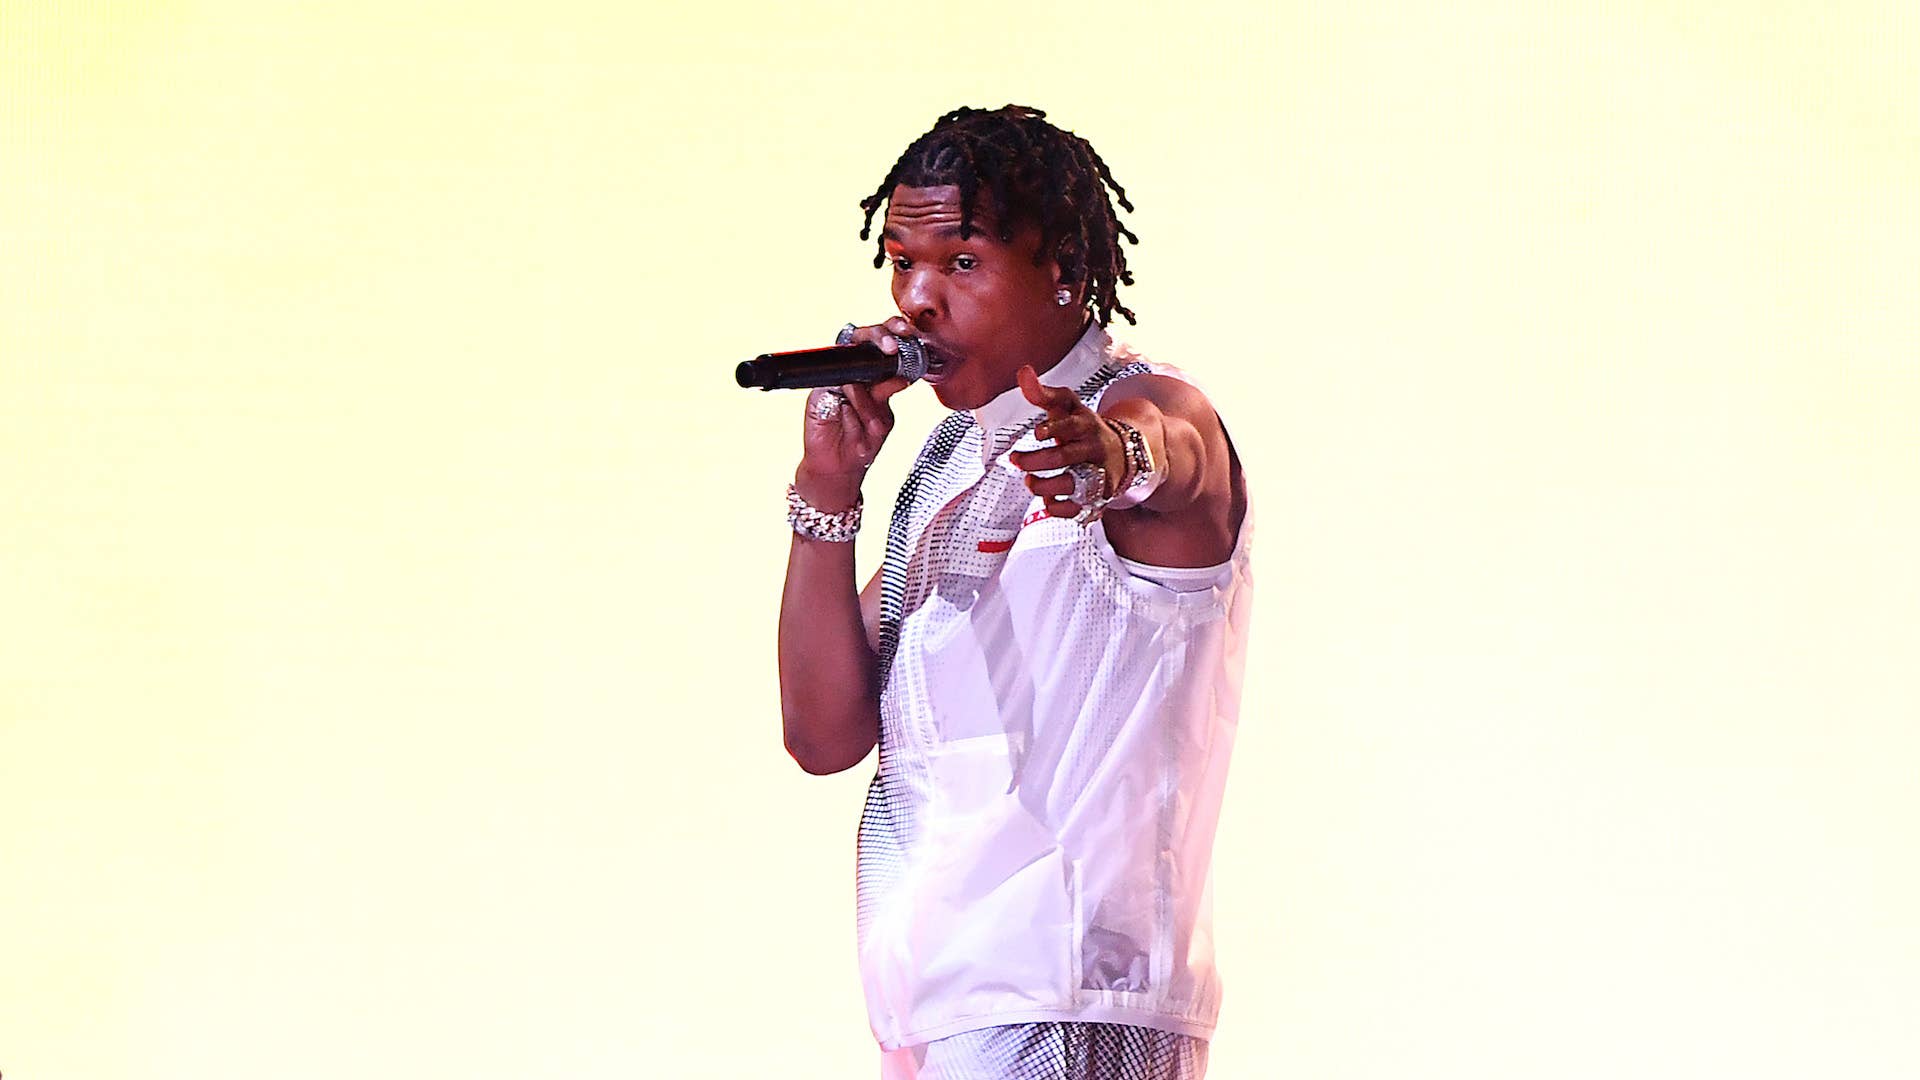 Lil Baby performs onstage for the 2020 American Music Awards at Microsoft Theater